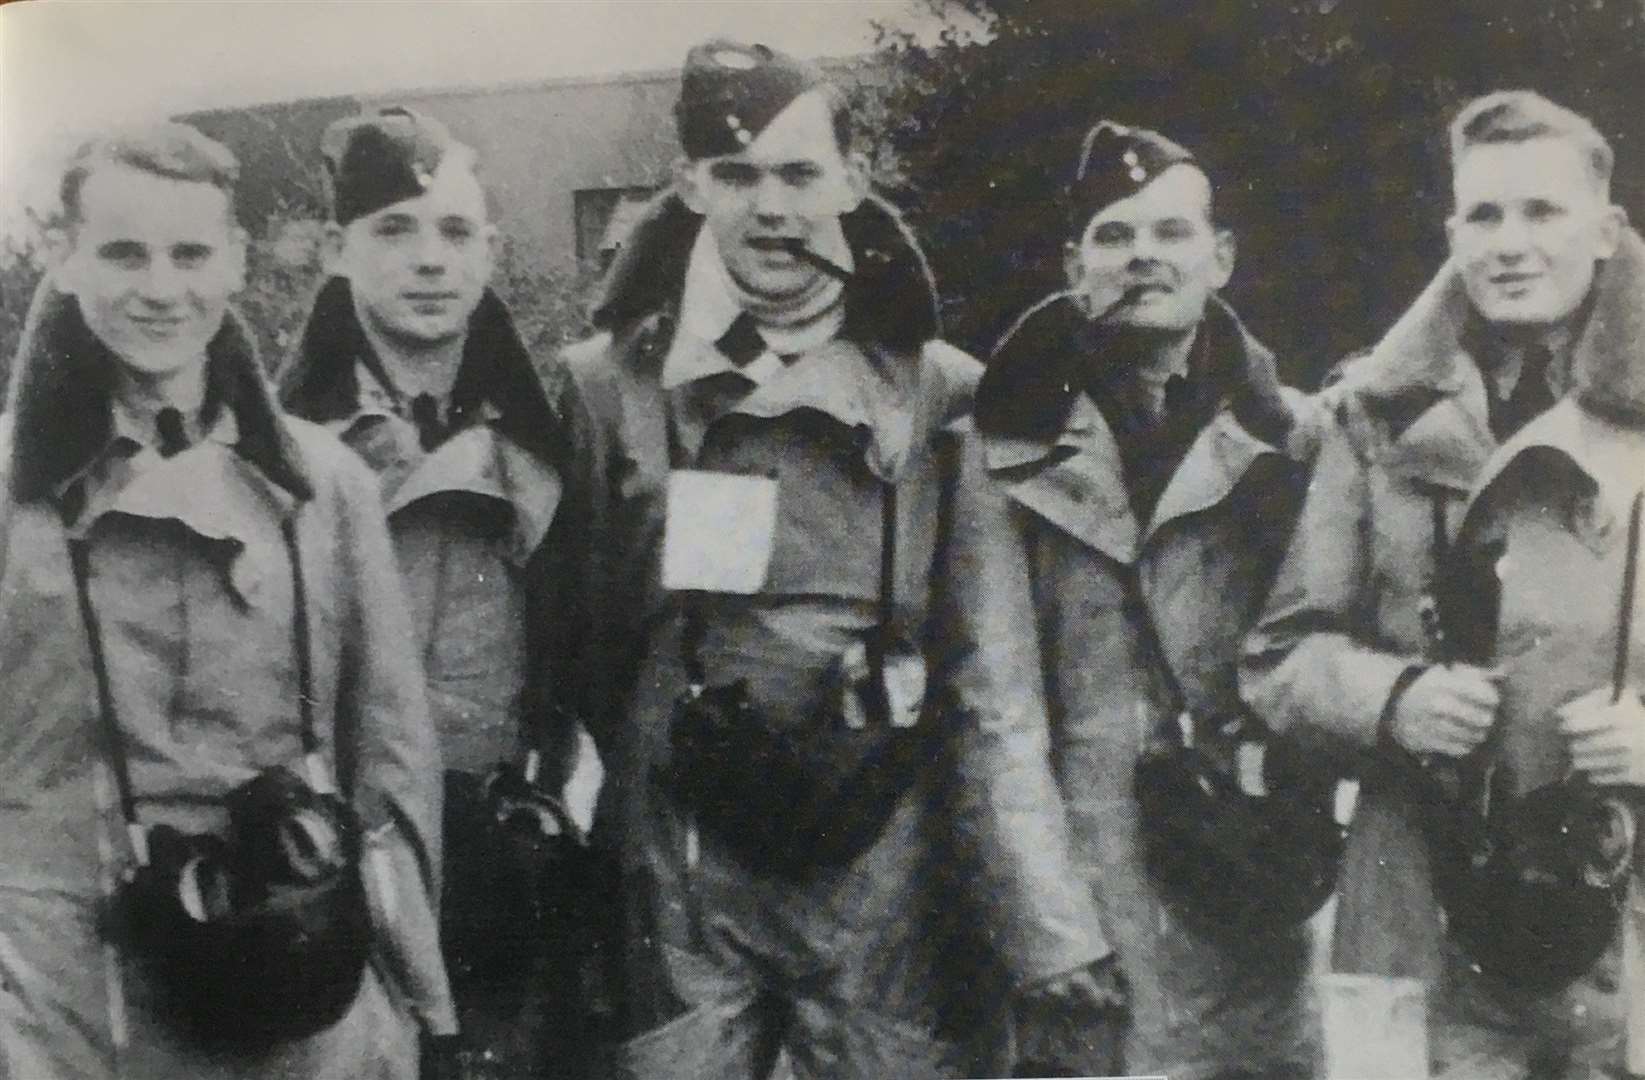 Robert Palmer, far right, with his squadron in 1940